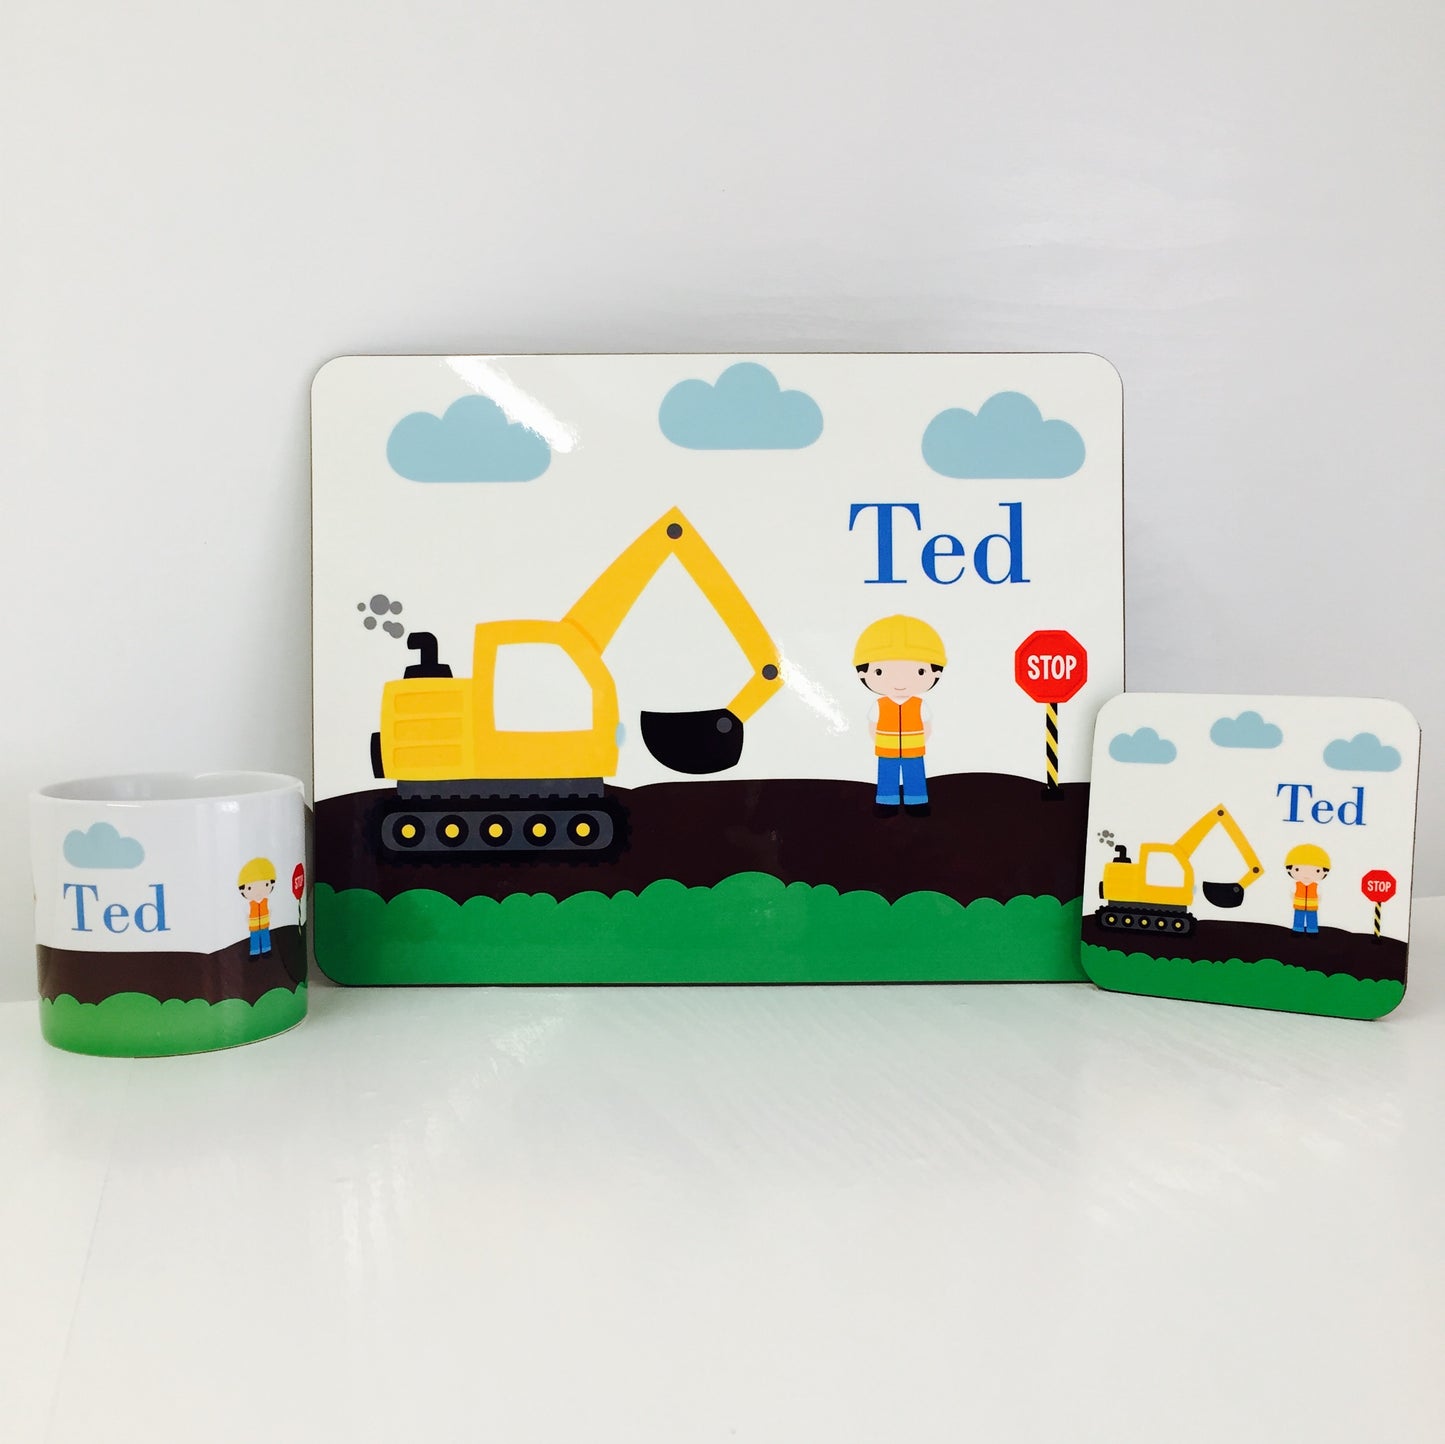 Personalised Children's Placemat Sets (Other designs available)